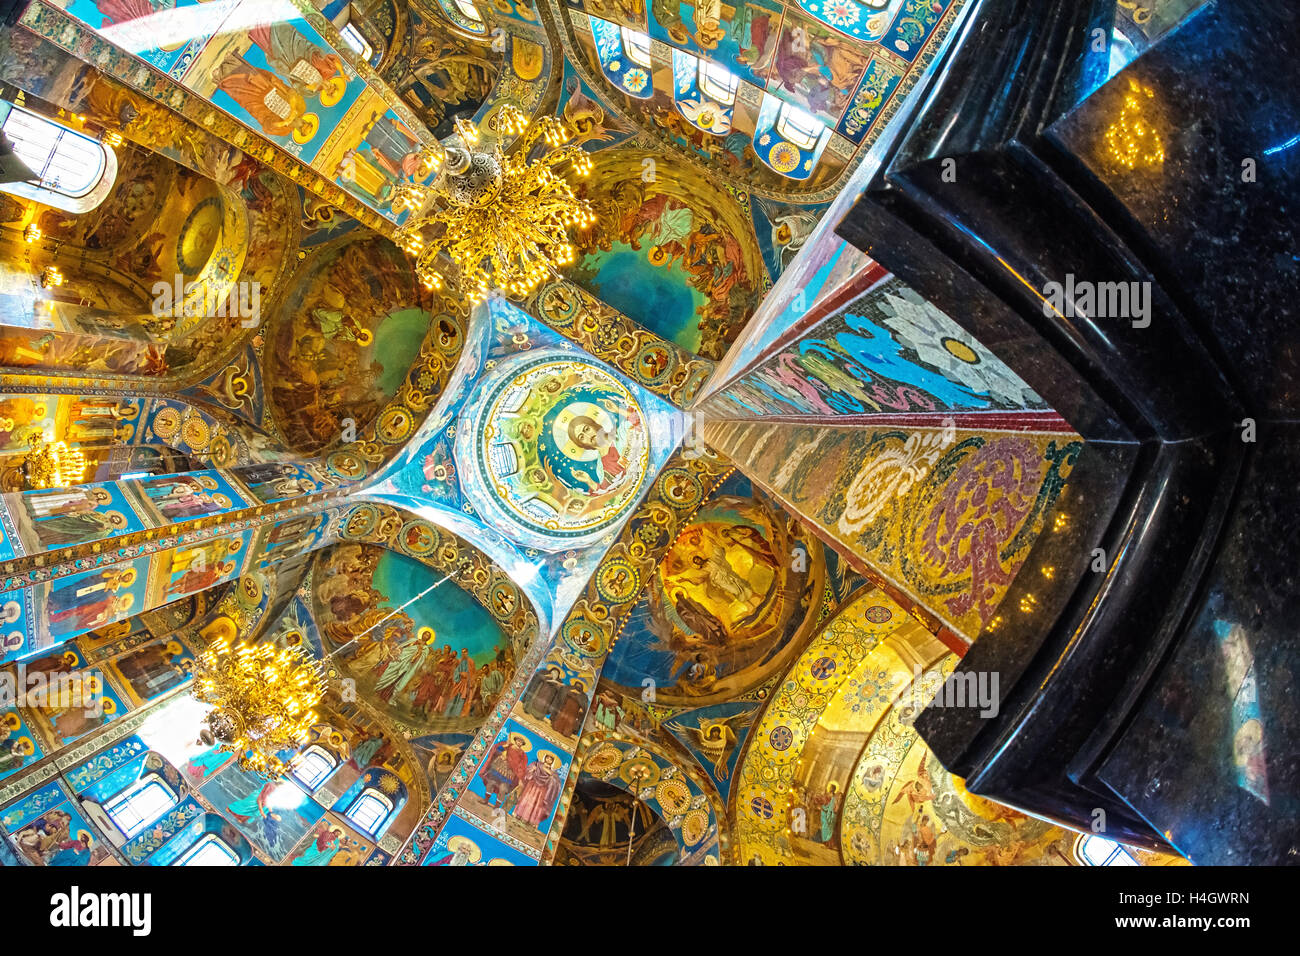 ST. PETERSBURG, RUSSIA - JULY 14, 2016: Interior of Church of the Savior on Spilled Blood. Architectural landmark and monument t Stock Photo